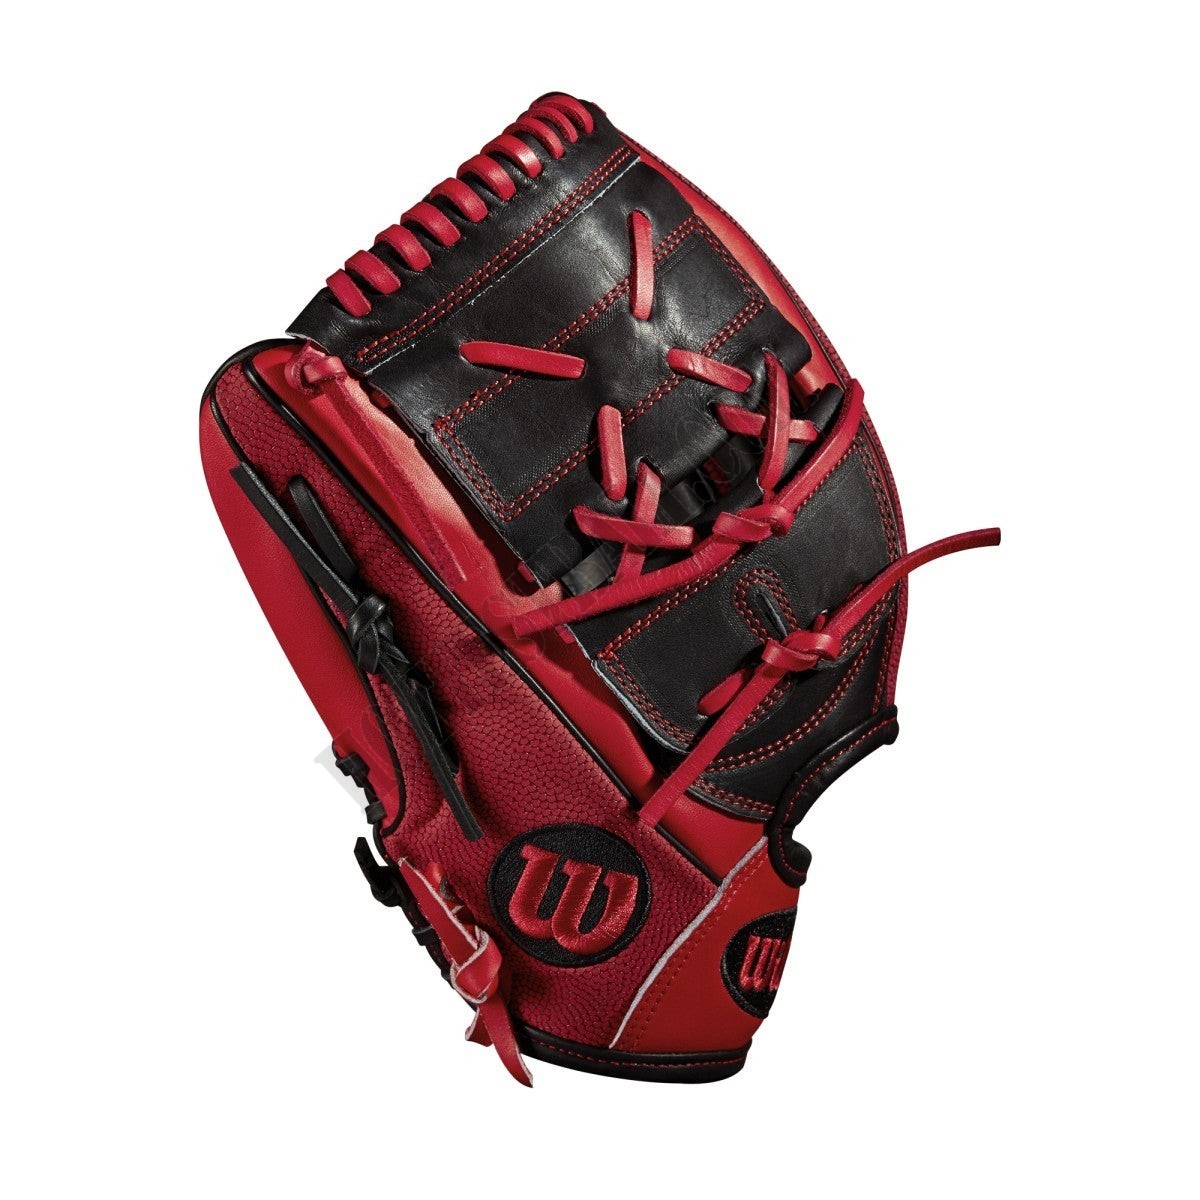 2018 A2000 MA14 SuperSkin GM 12.25" Pitcher's Fastpitch Glove - Left Hand Throw ● Wilson Promotions - -5